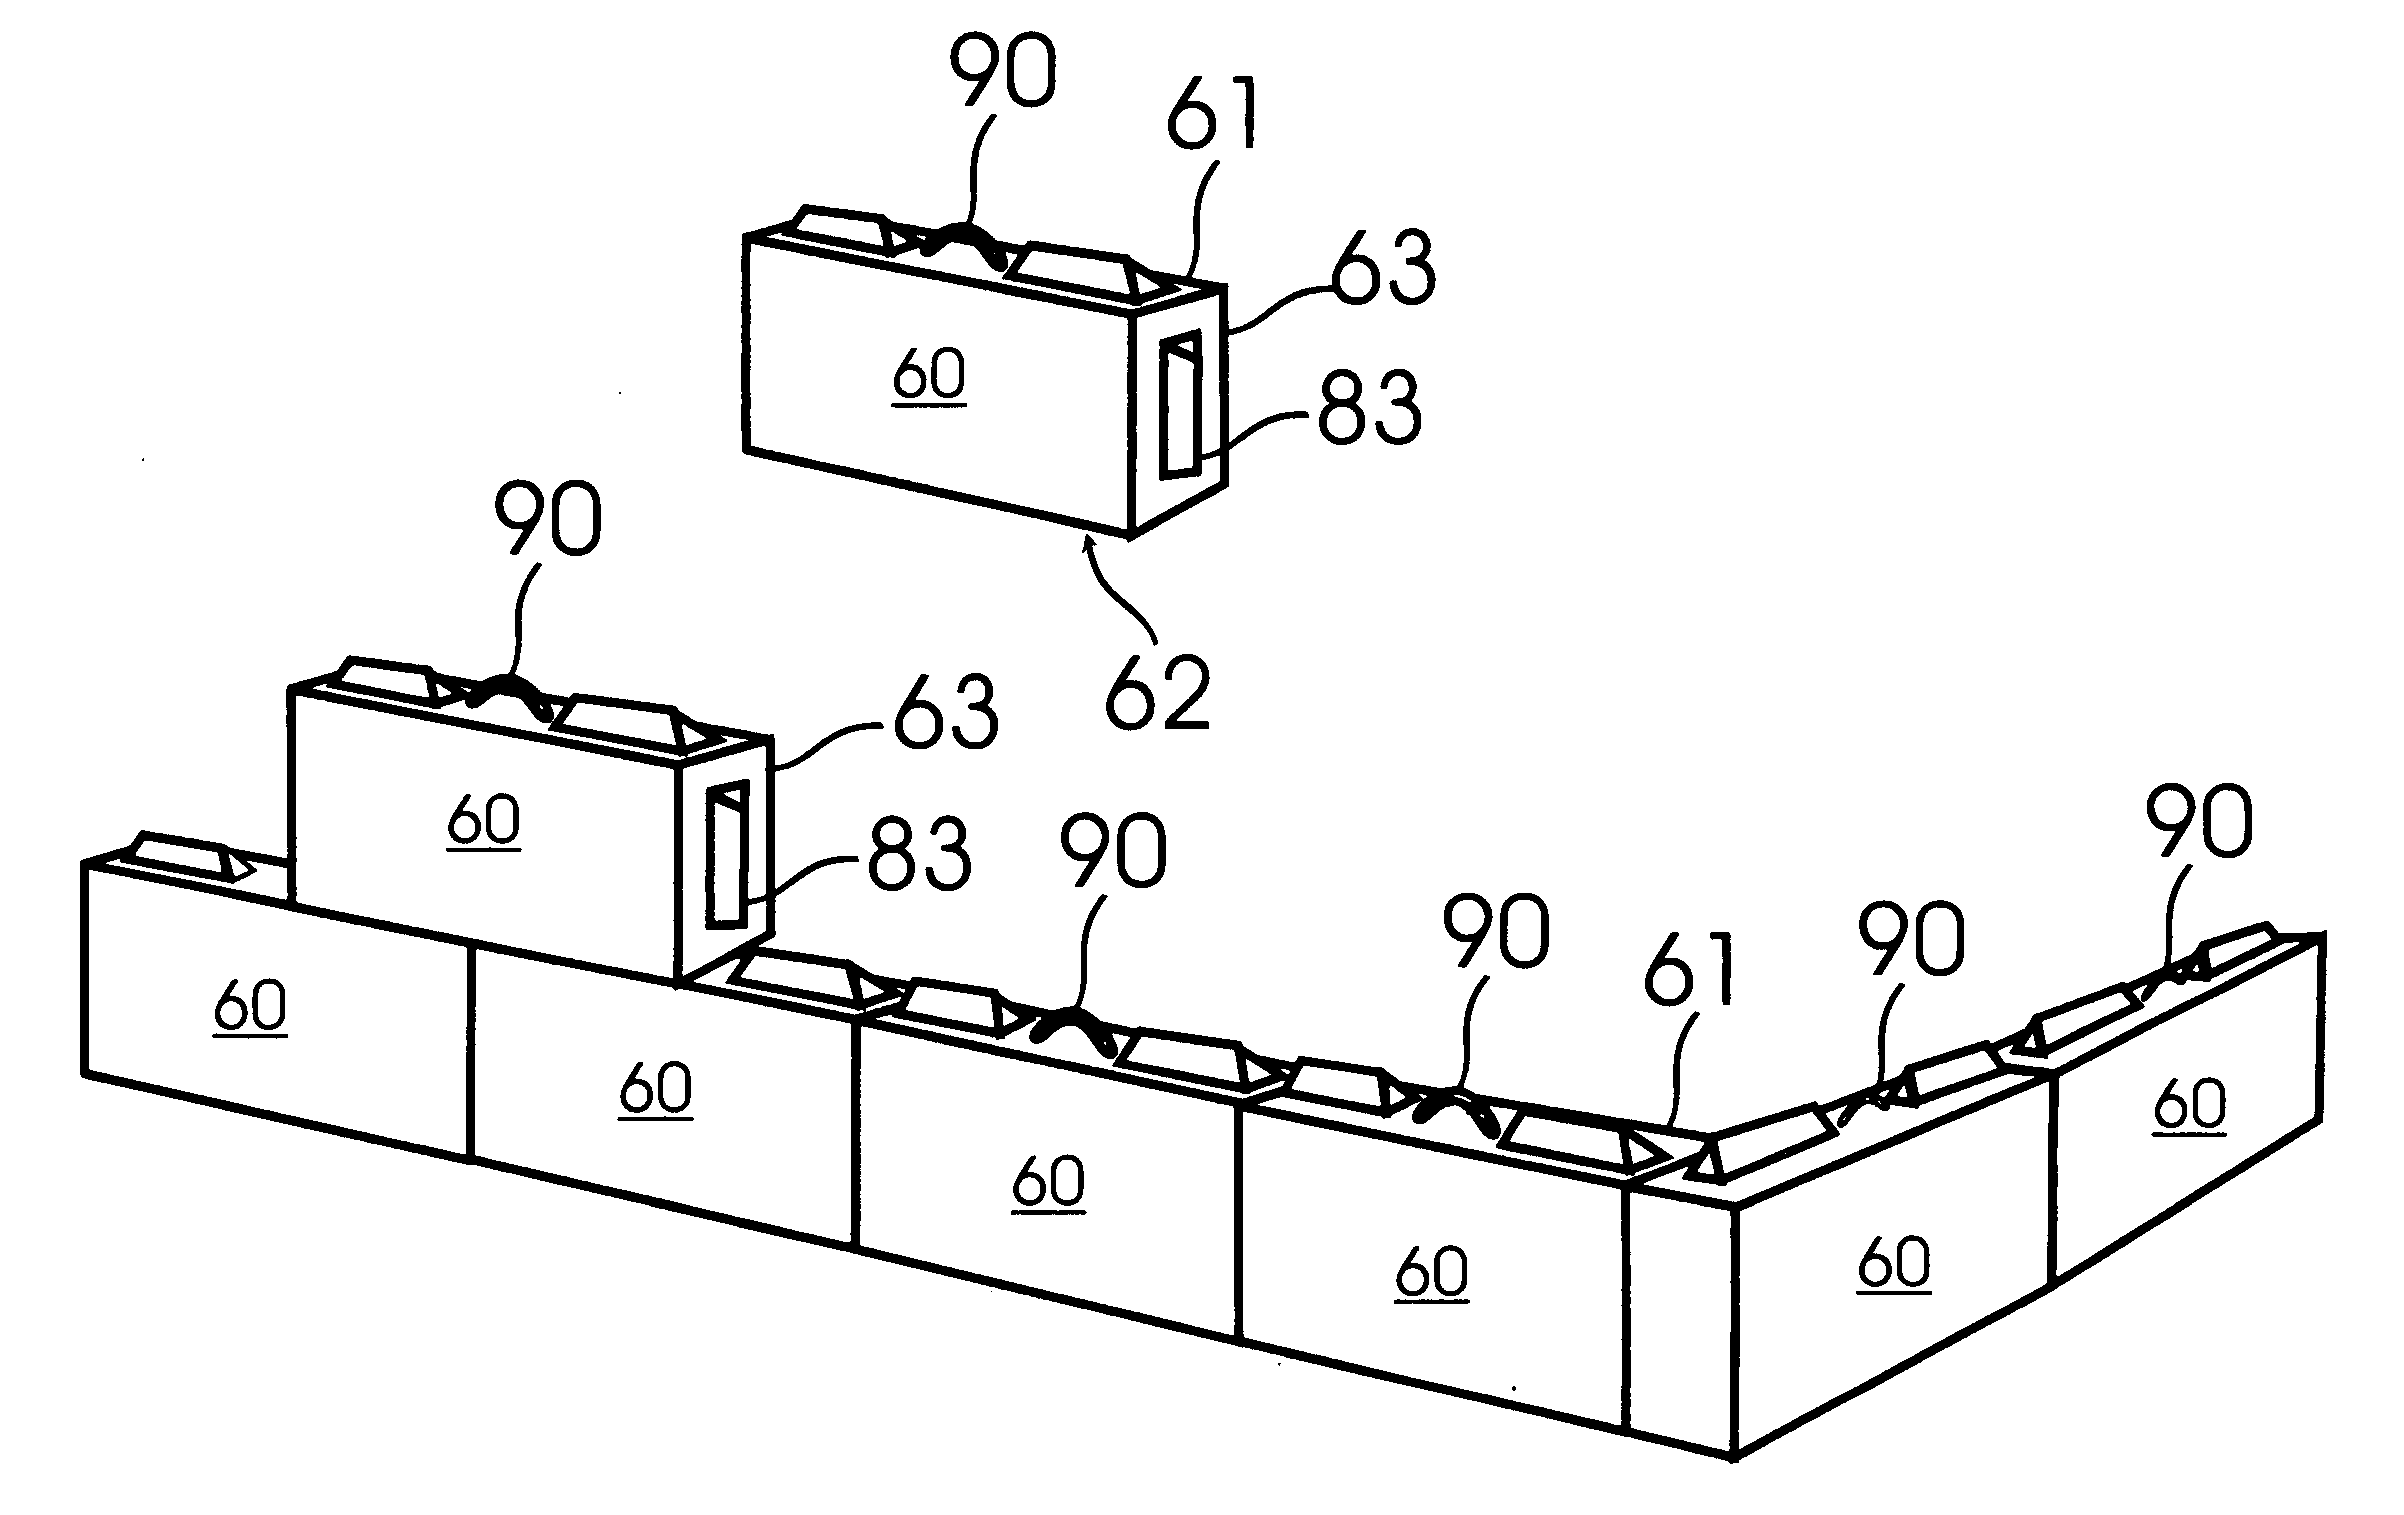 Method for constructing cultured stone block buildings